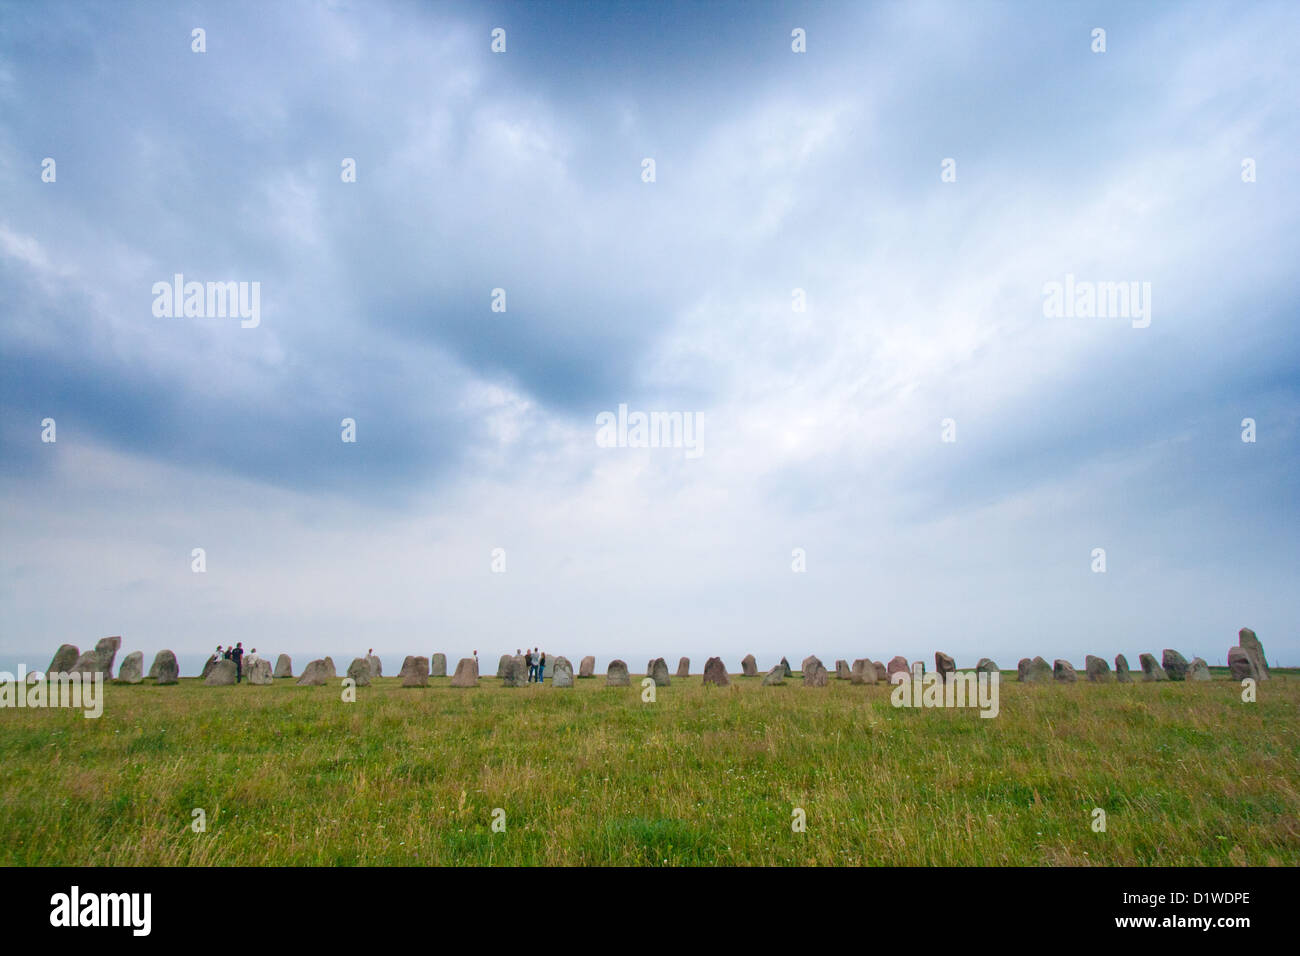 Ale's Stones (Ales stenar) megalithic monument in Scania, Sweden. Stock Photo